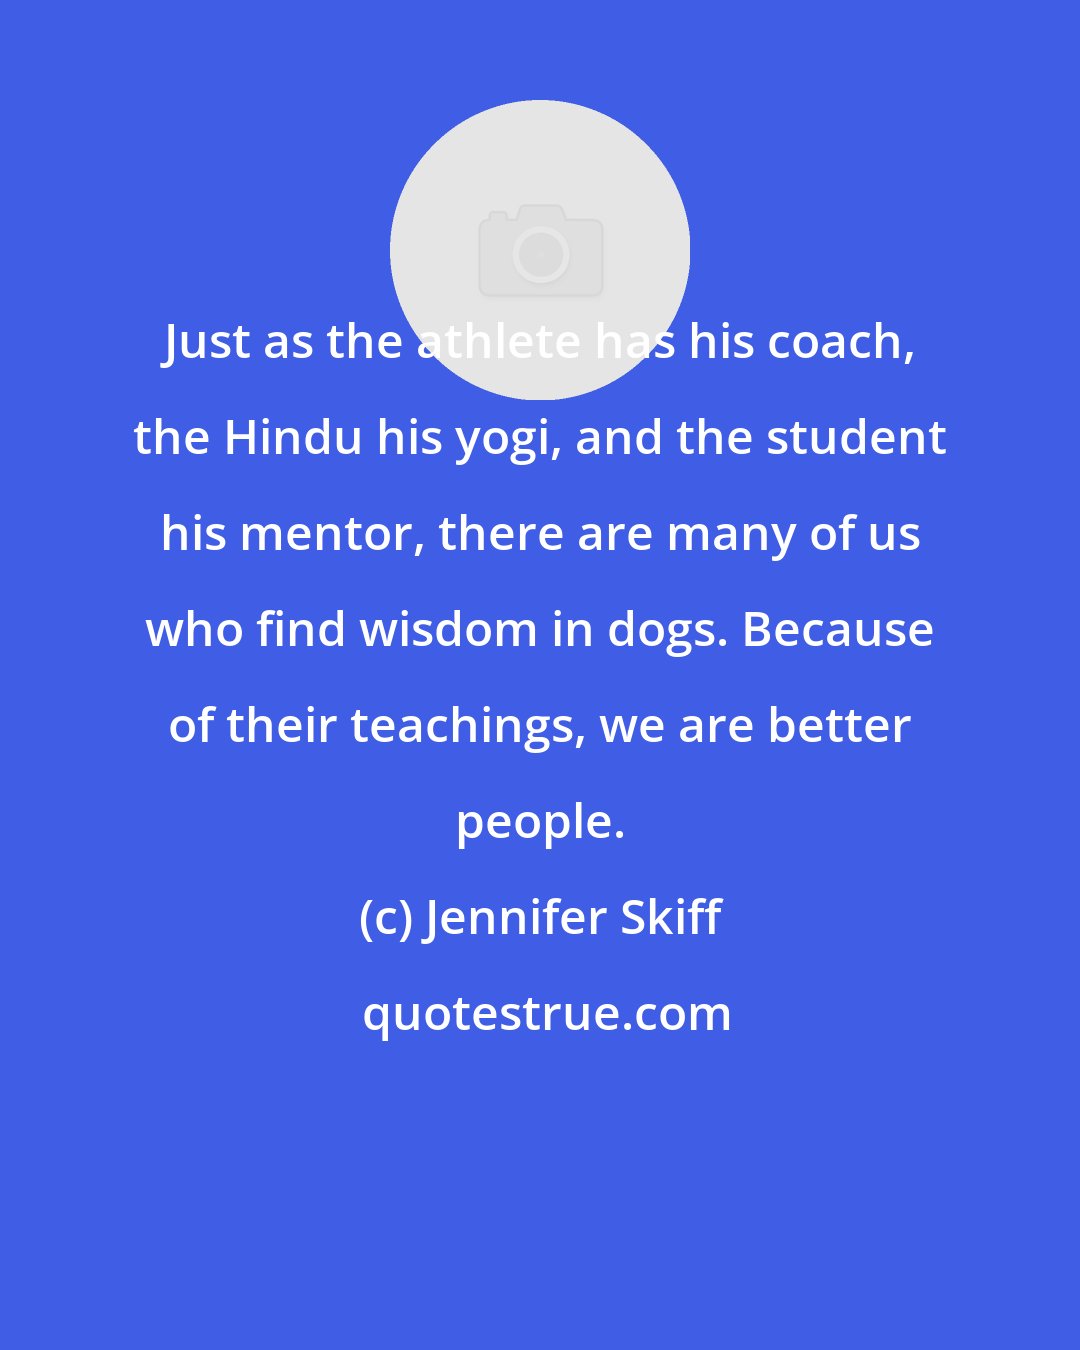 Jennifer Skiff: Just as the athlete has his coach, the Hindu his yogi, and the student his mentor, there are many of us who find wisdom in dogs. Because of their teachings, we are better people.